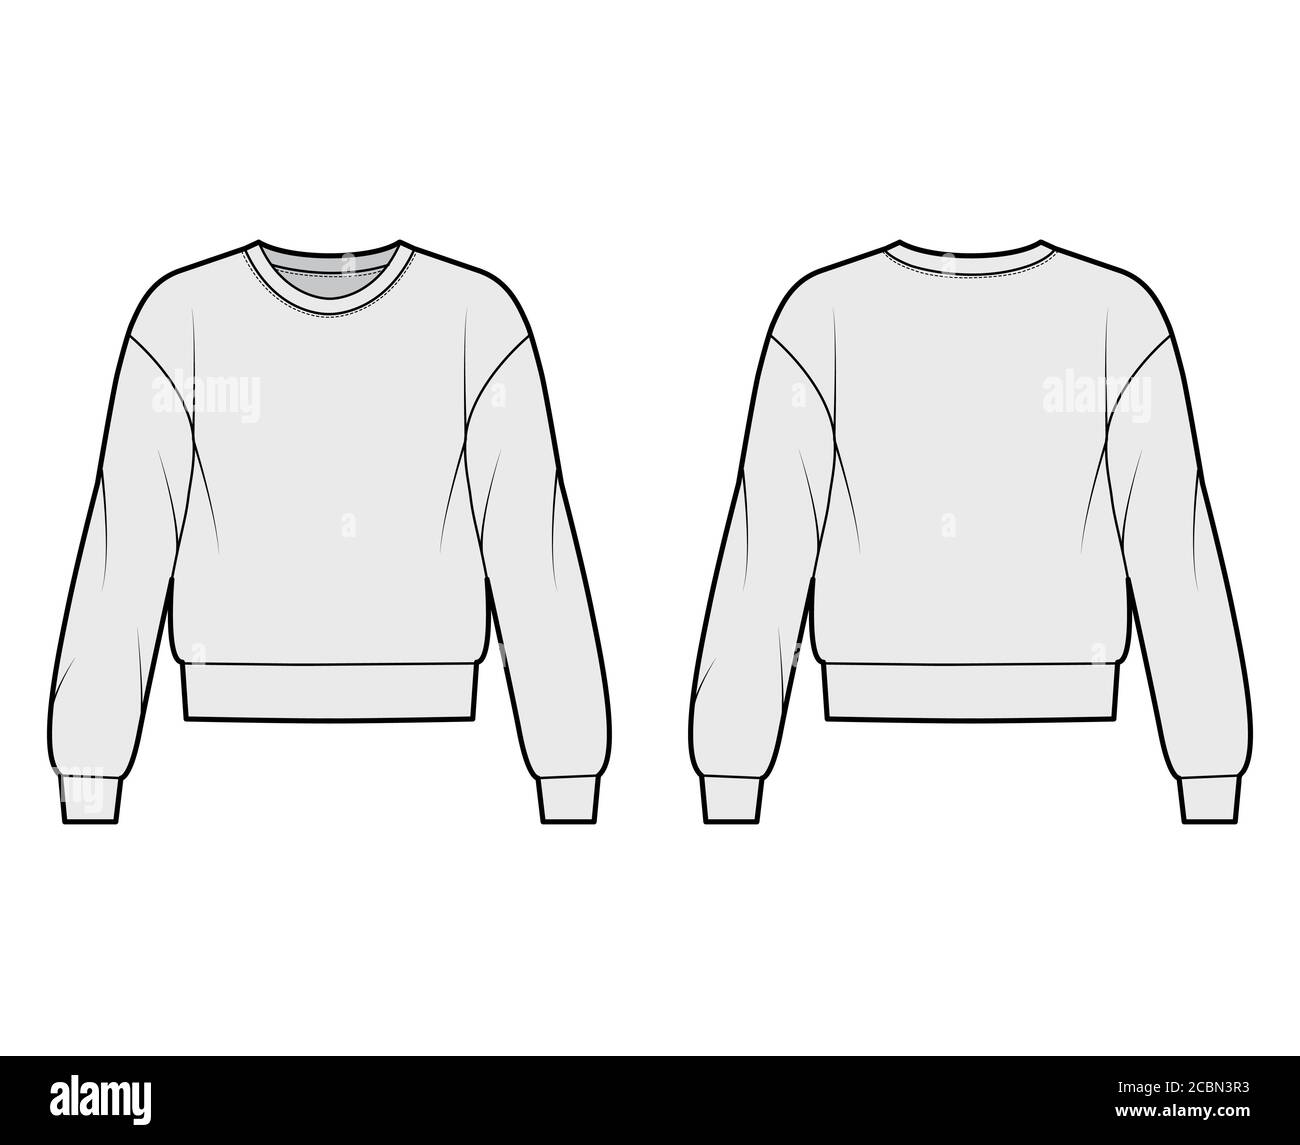 Cotton-terry sweatshirt technical fashion illustration with relaxed fit, crew neckline, long sleeves. Flat outwear jumper apparel template front, back, grey color. Women, men, unisex top CAD mockup Stock Vector